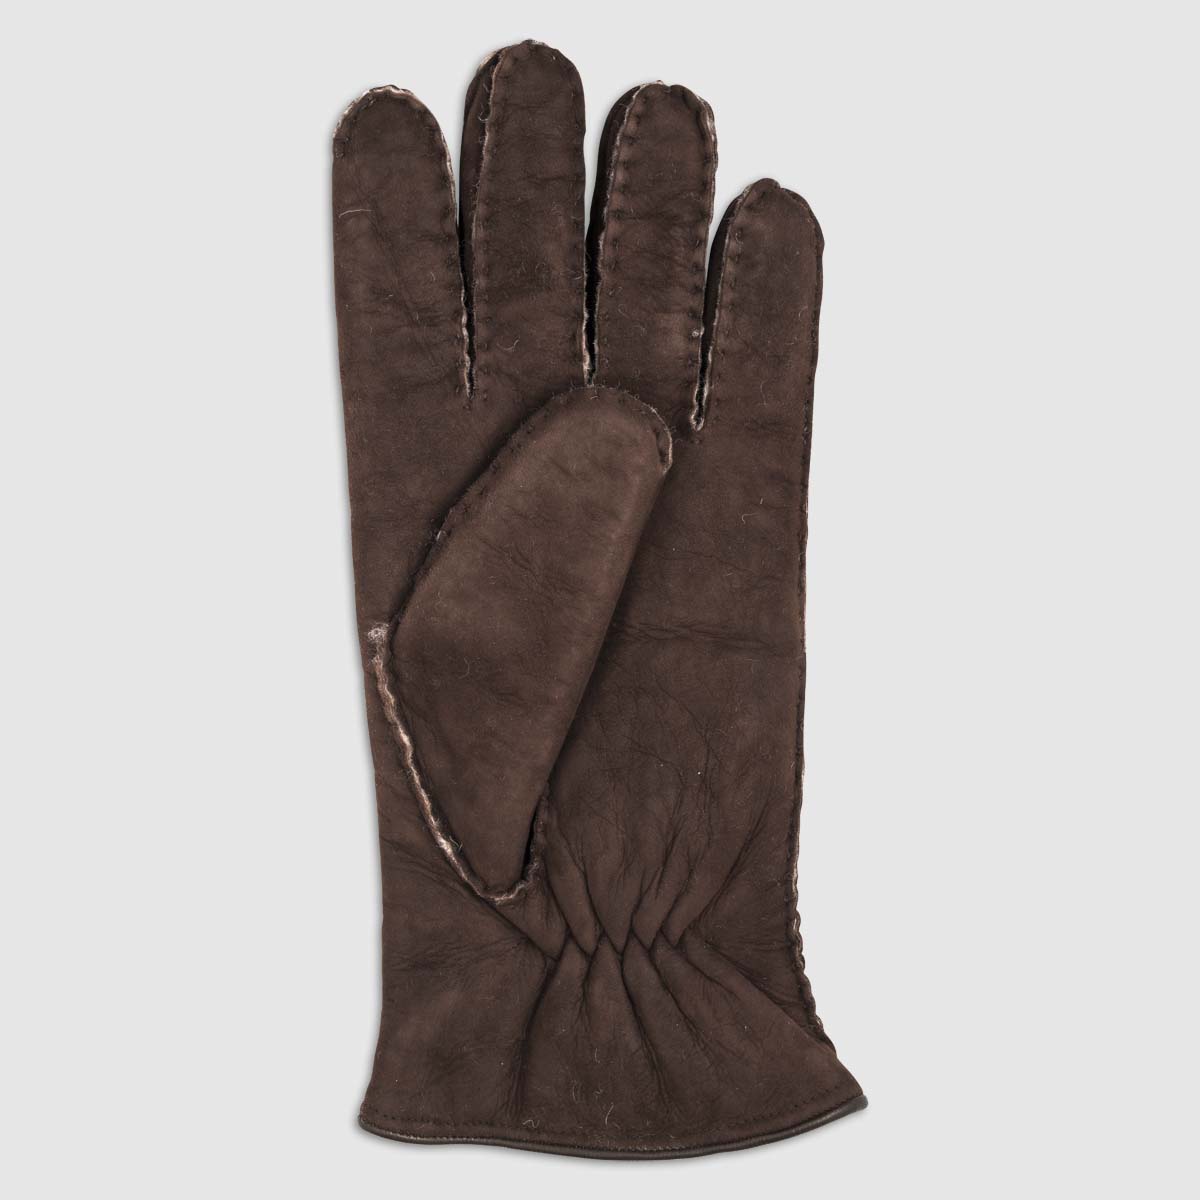 Leather Glove with Shearling Lining in Brown Alpo Guanti on sale 2022 2